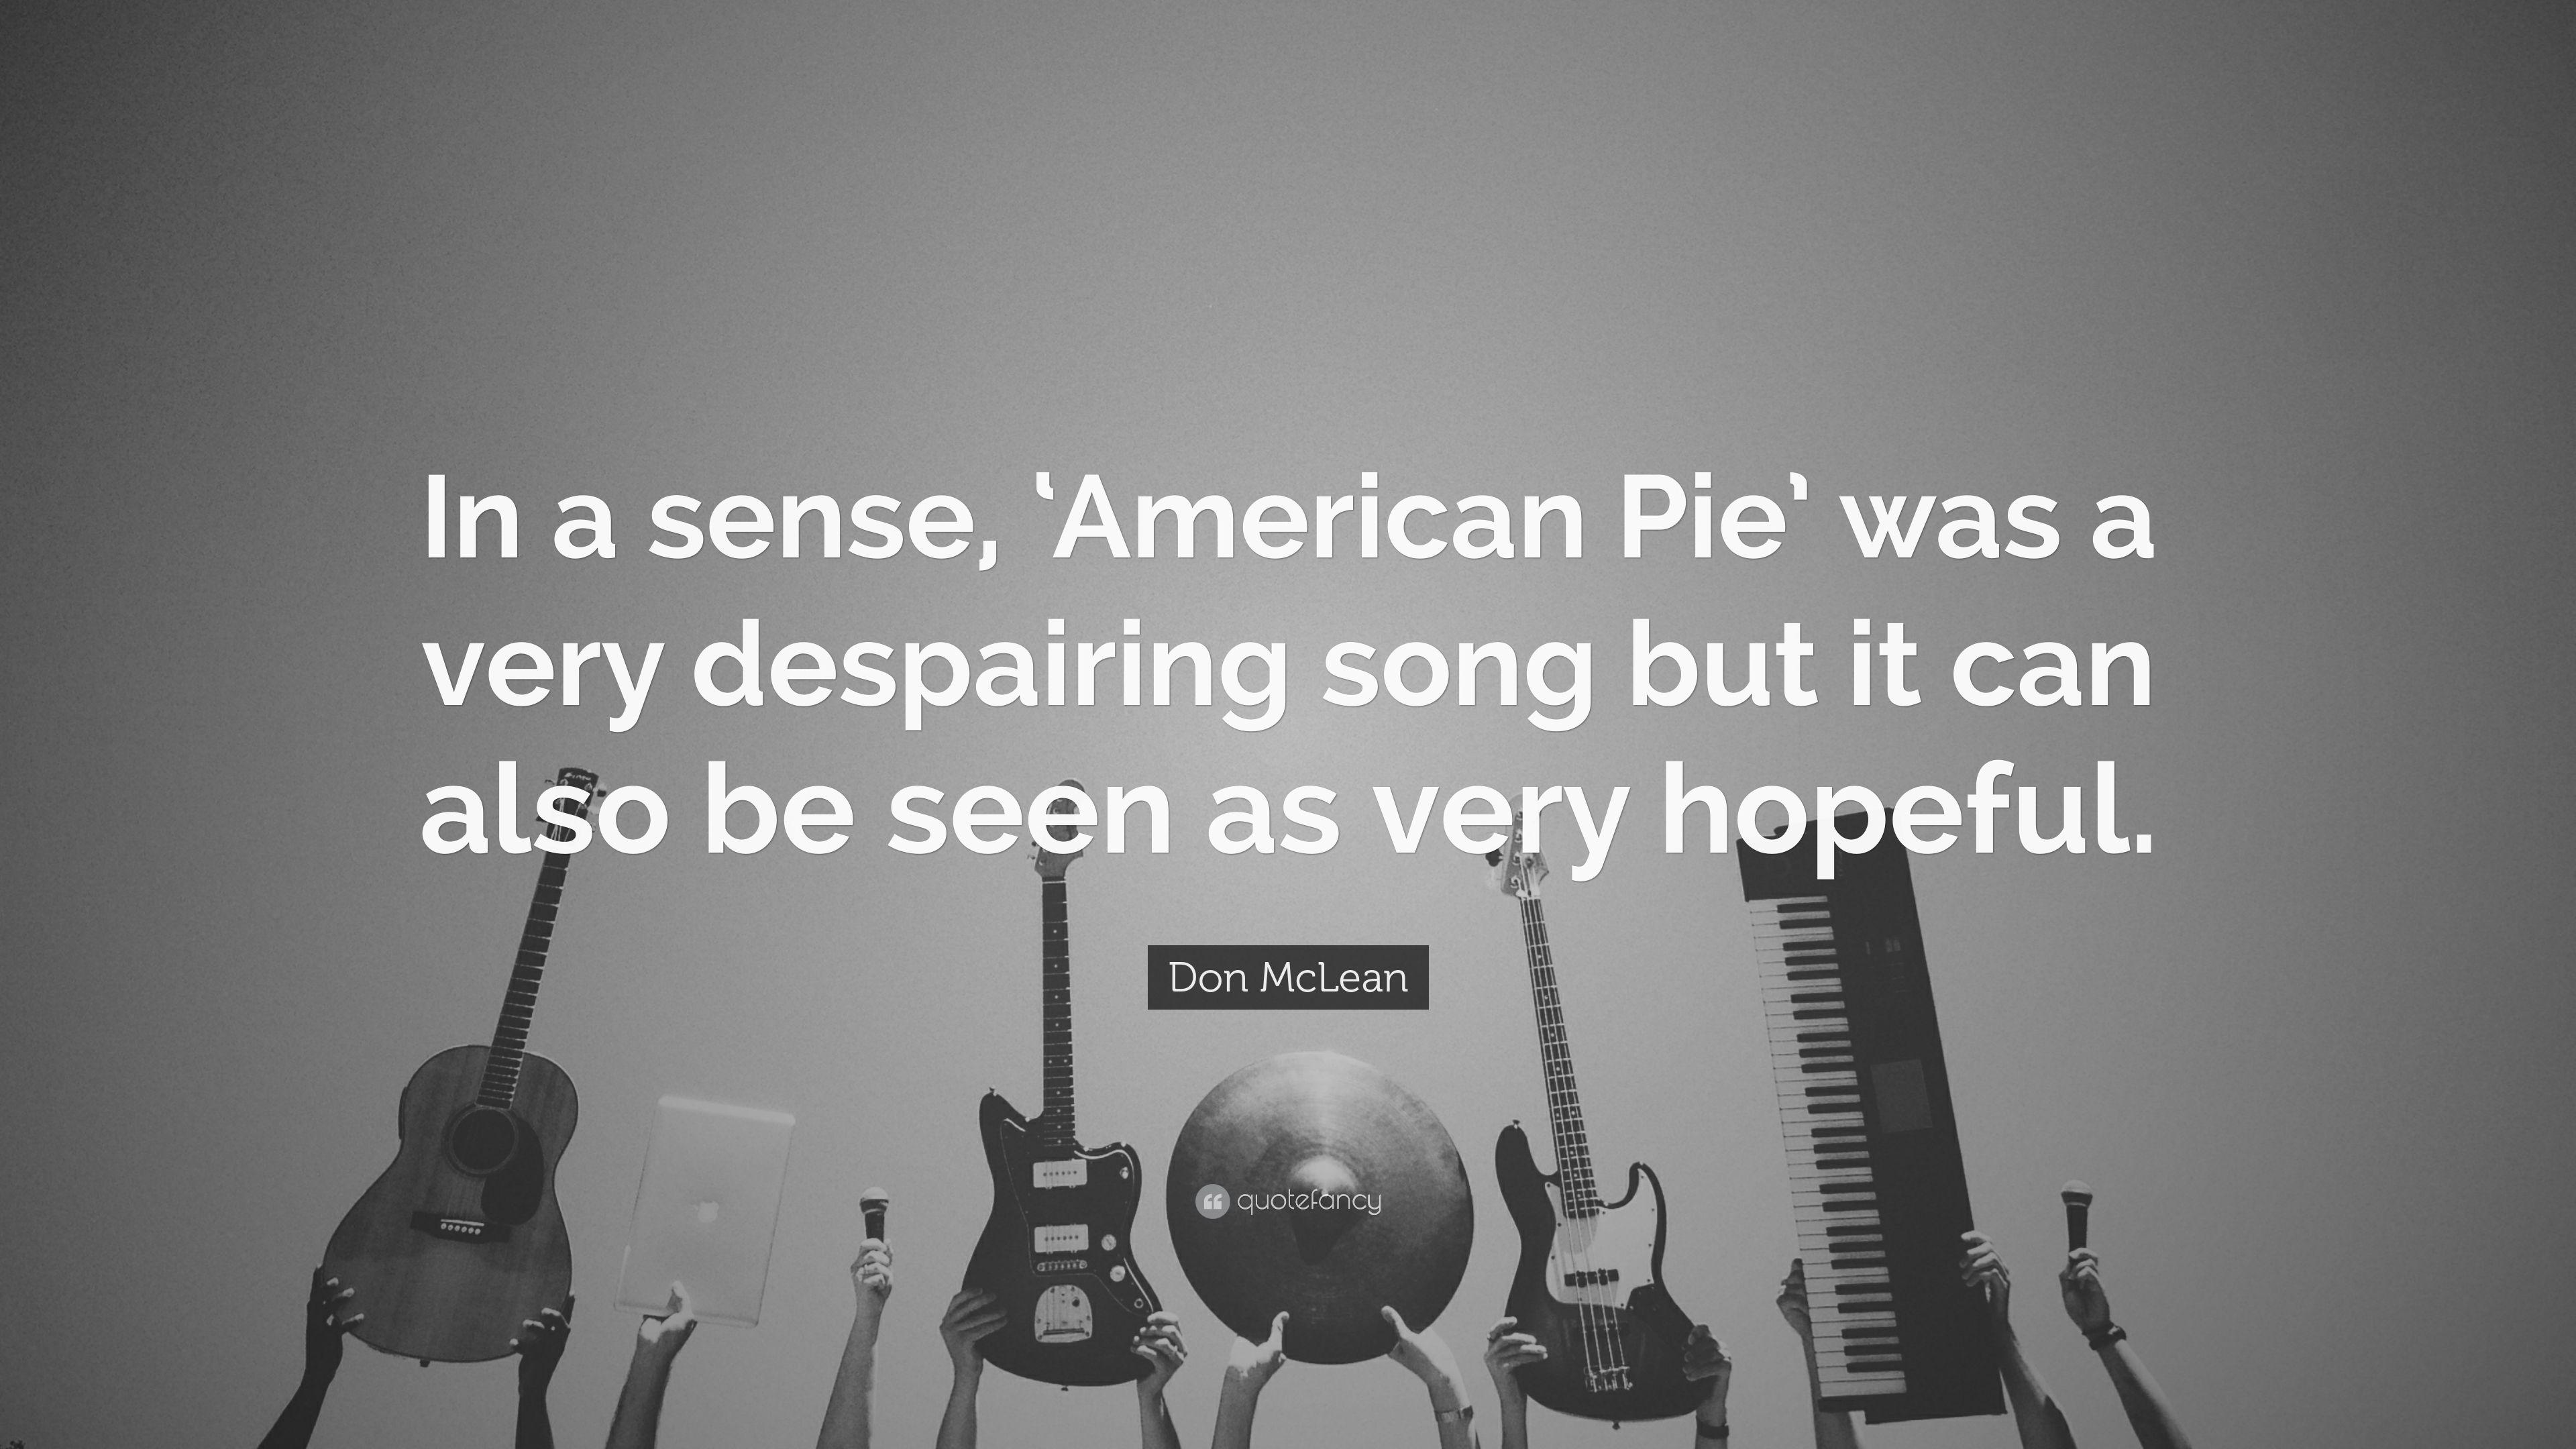 Don McLean Quote: “In a sense, 'American Pie' was a very